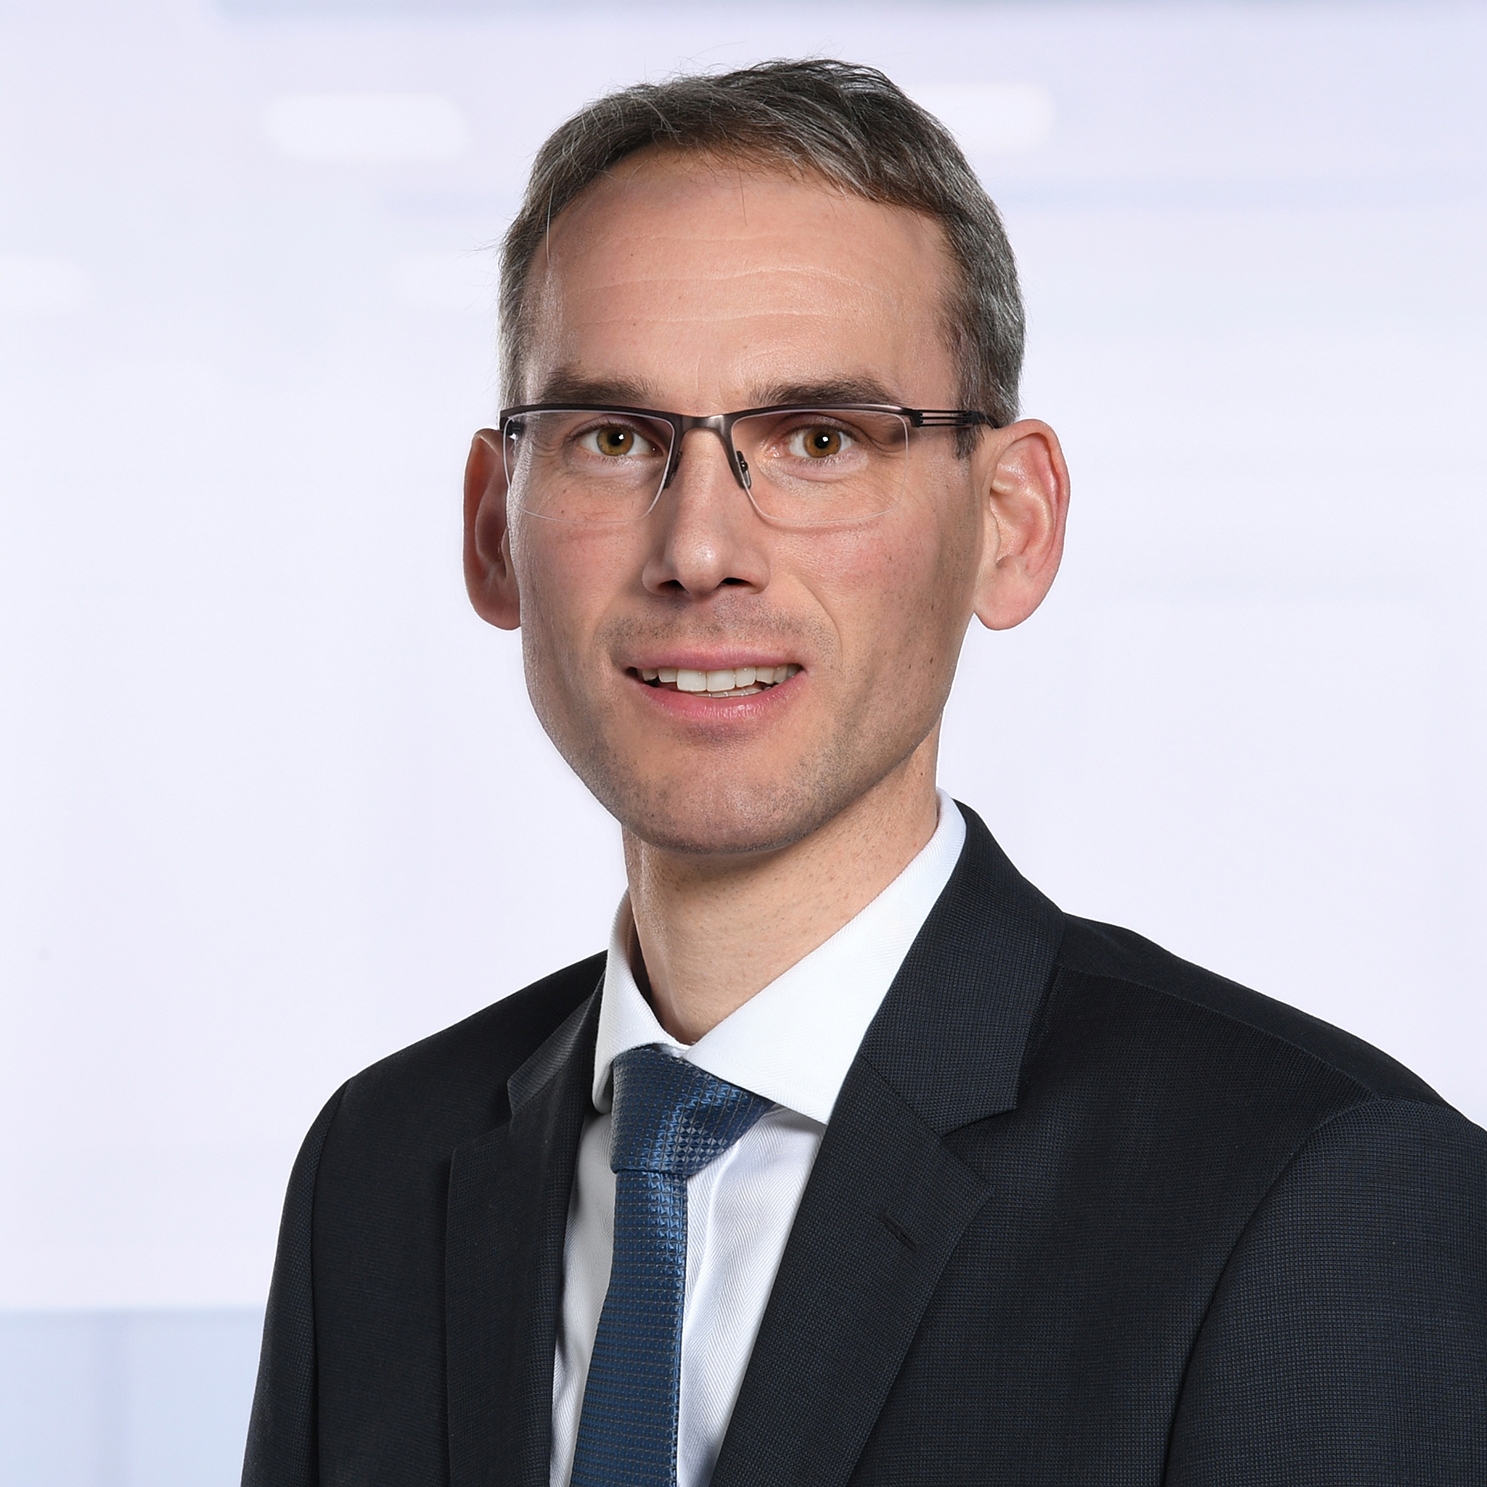 Dr. Markus Weber, Member of the ZEISS Group Executive Board and Head of Medical Technology segment